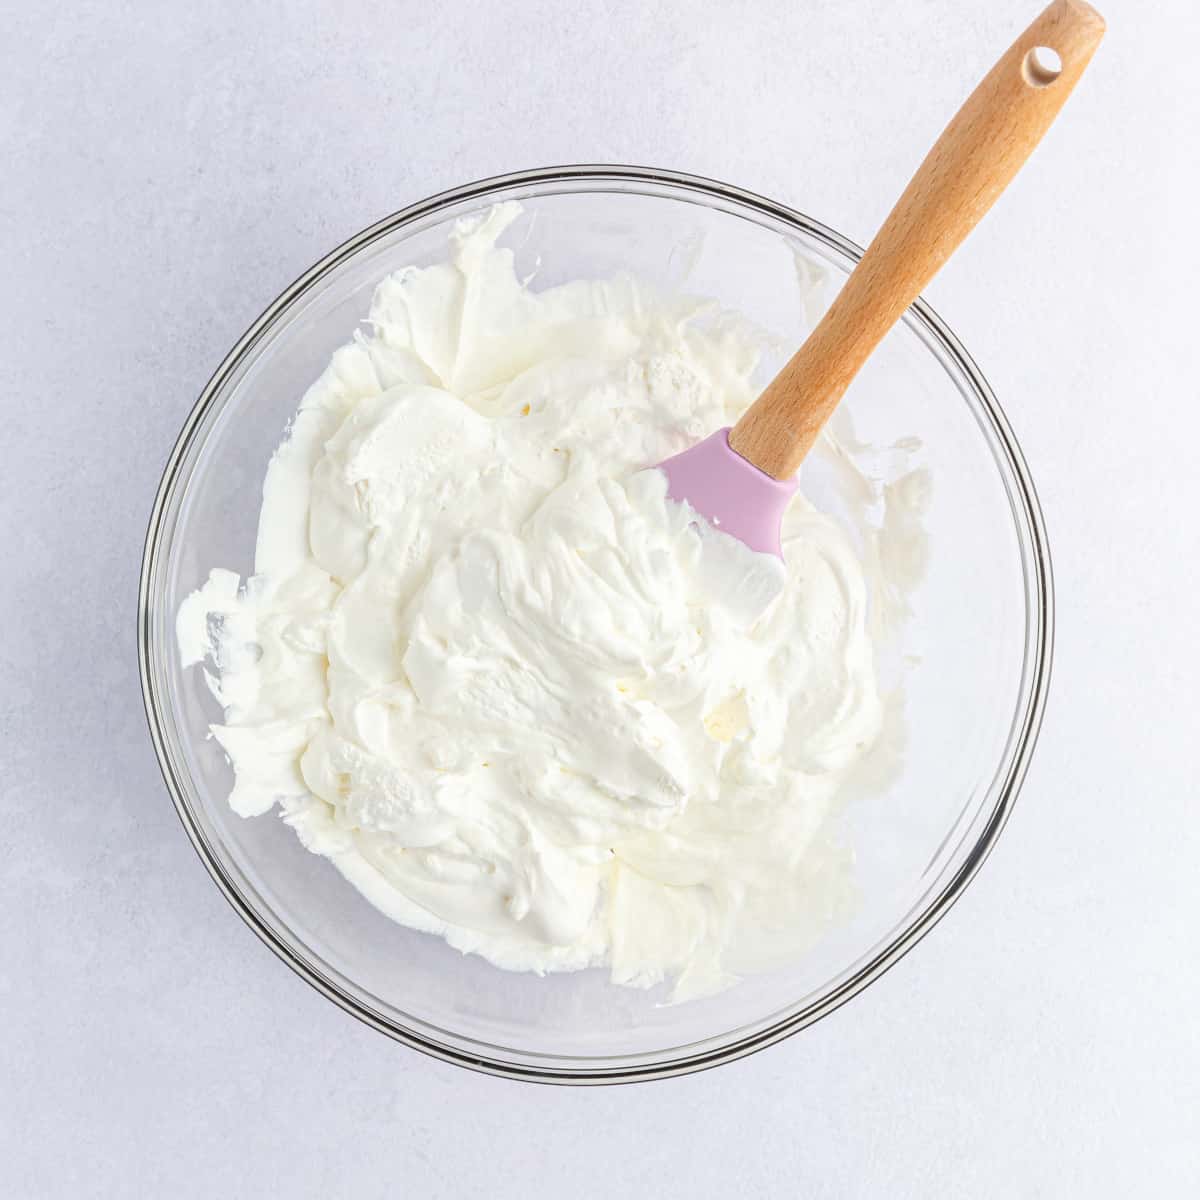 Stirring the sour cream and cool whip together in a glass bowl with a wooden spoon.